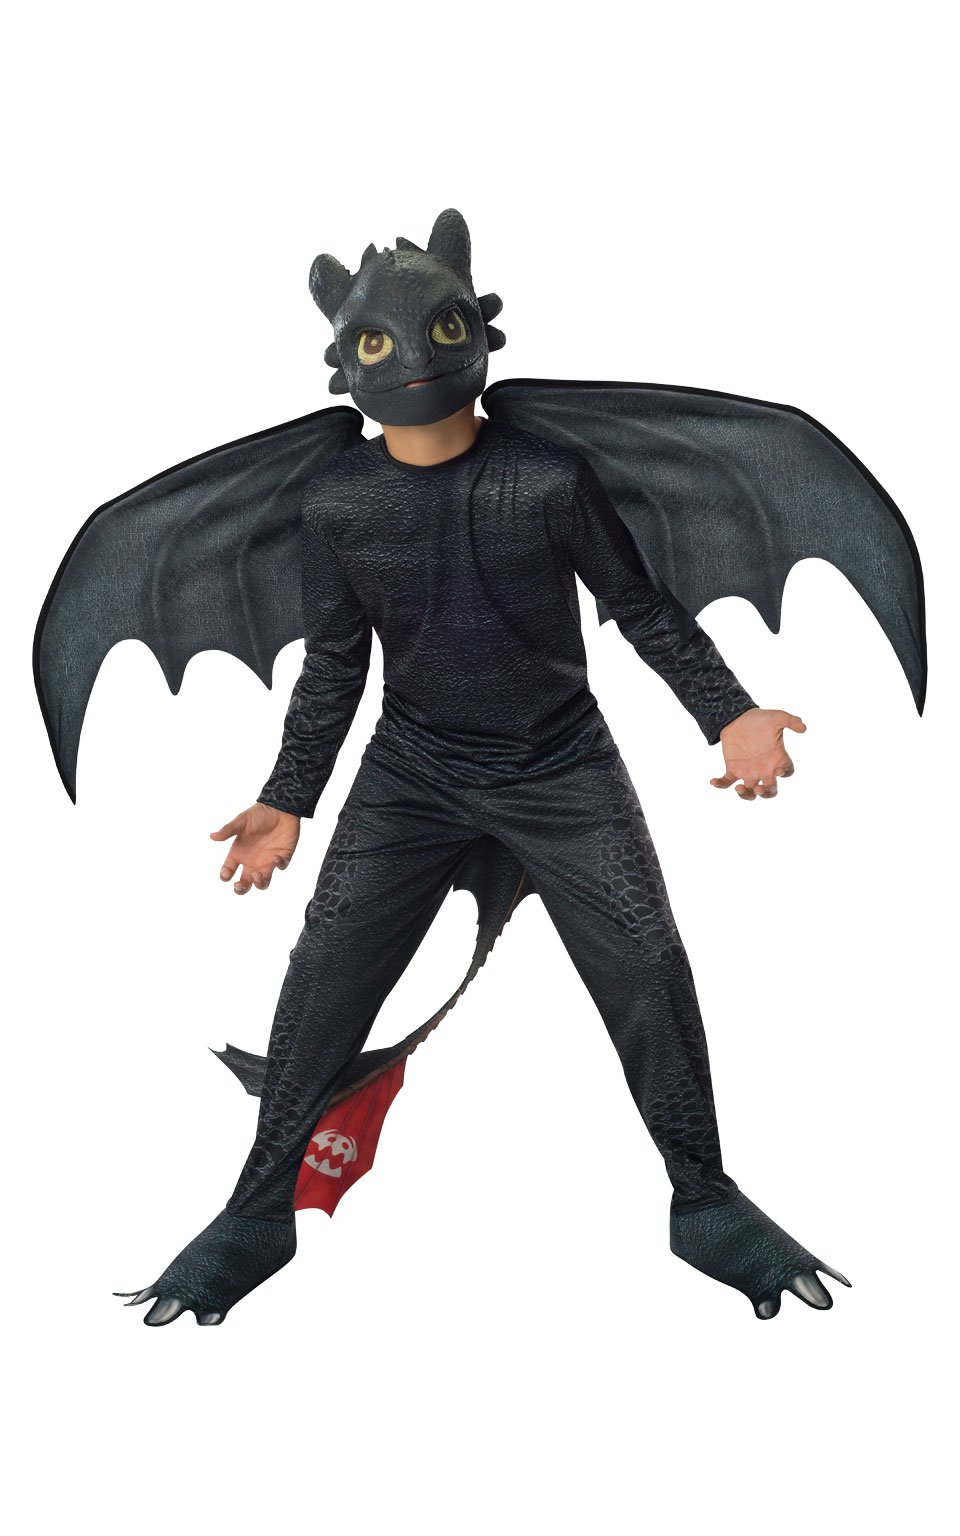 How to Train Your Dragon Kids Toothless Costume